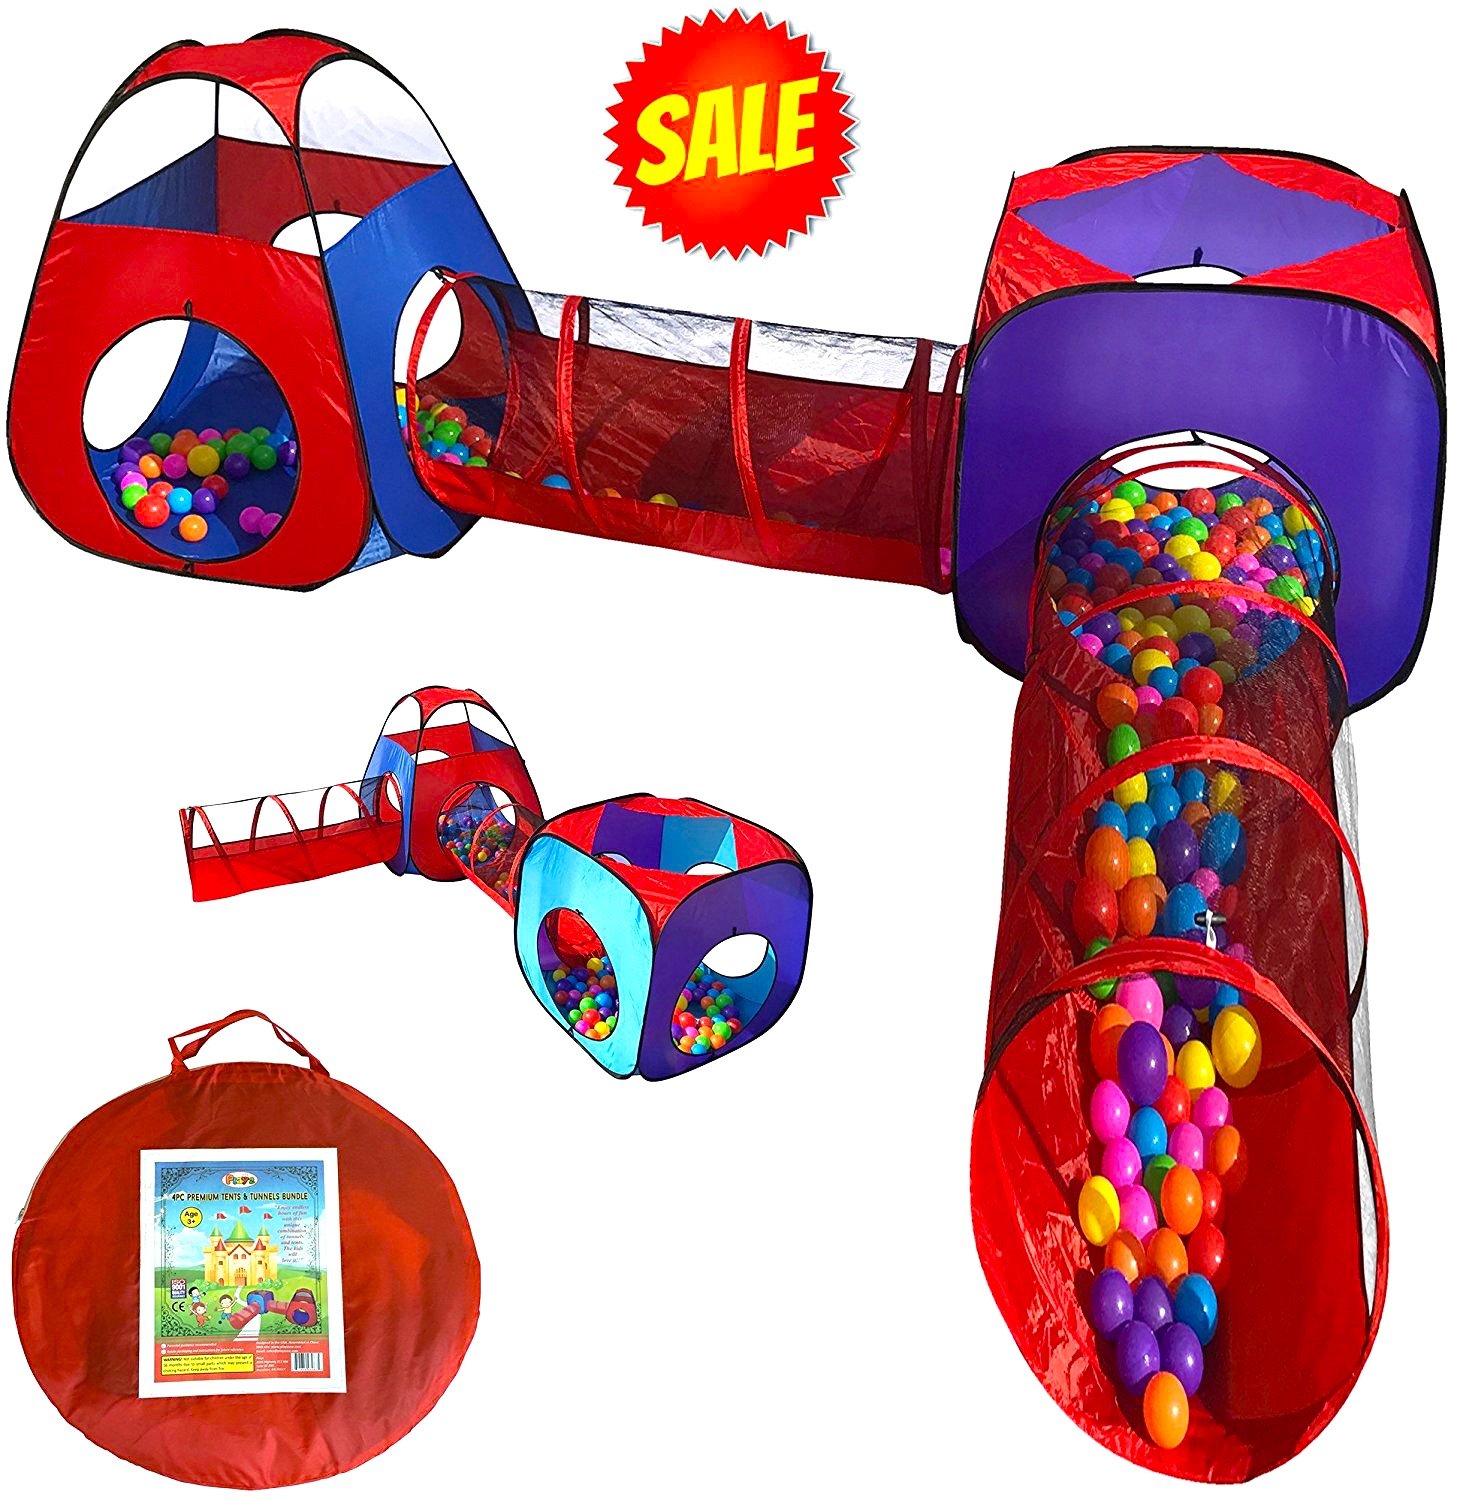 7 Best Crawling Tunnels for Toddlers 2022 - Buying Guide 7